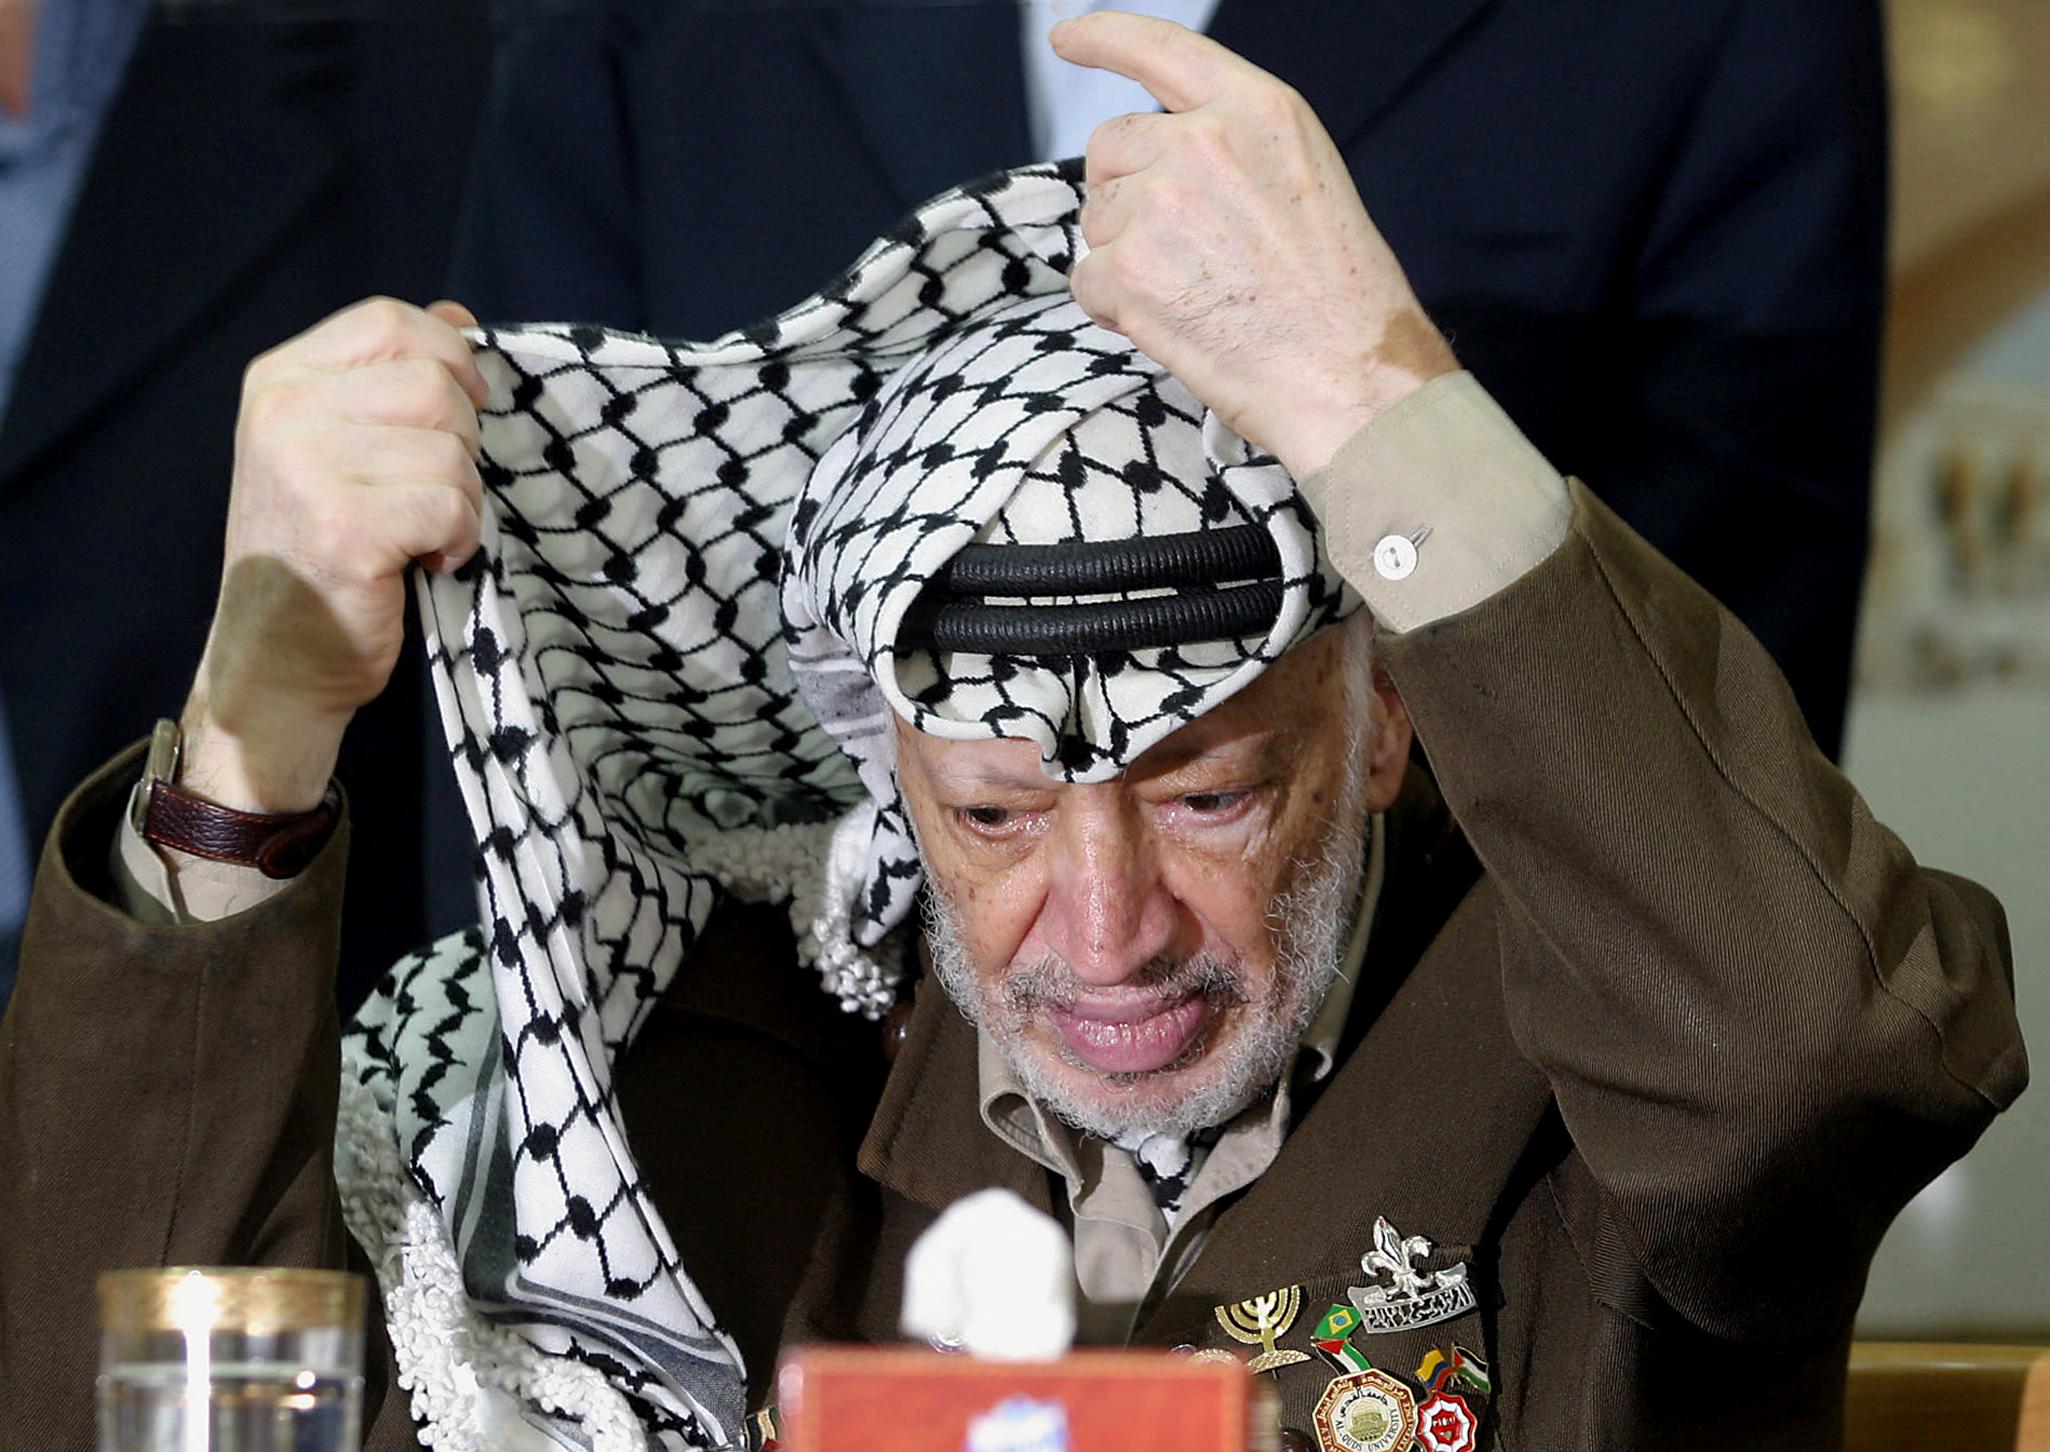 Yasser Arafat lead the Palestinian Liberation Organisation (PLO) from 1969 until his death in 2004 (AFP)